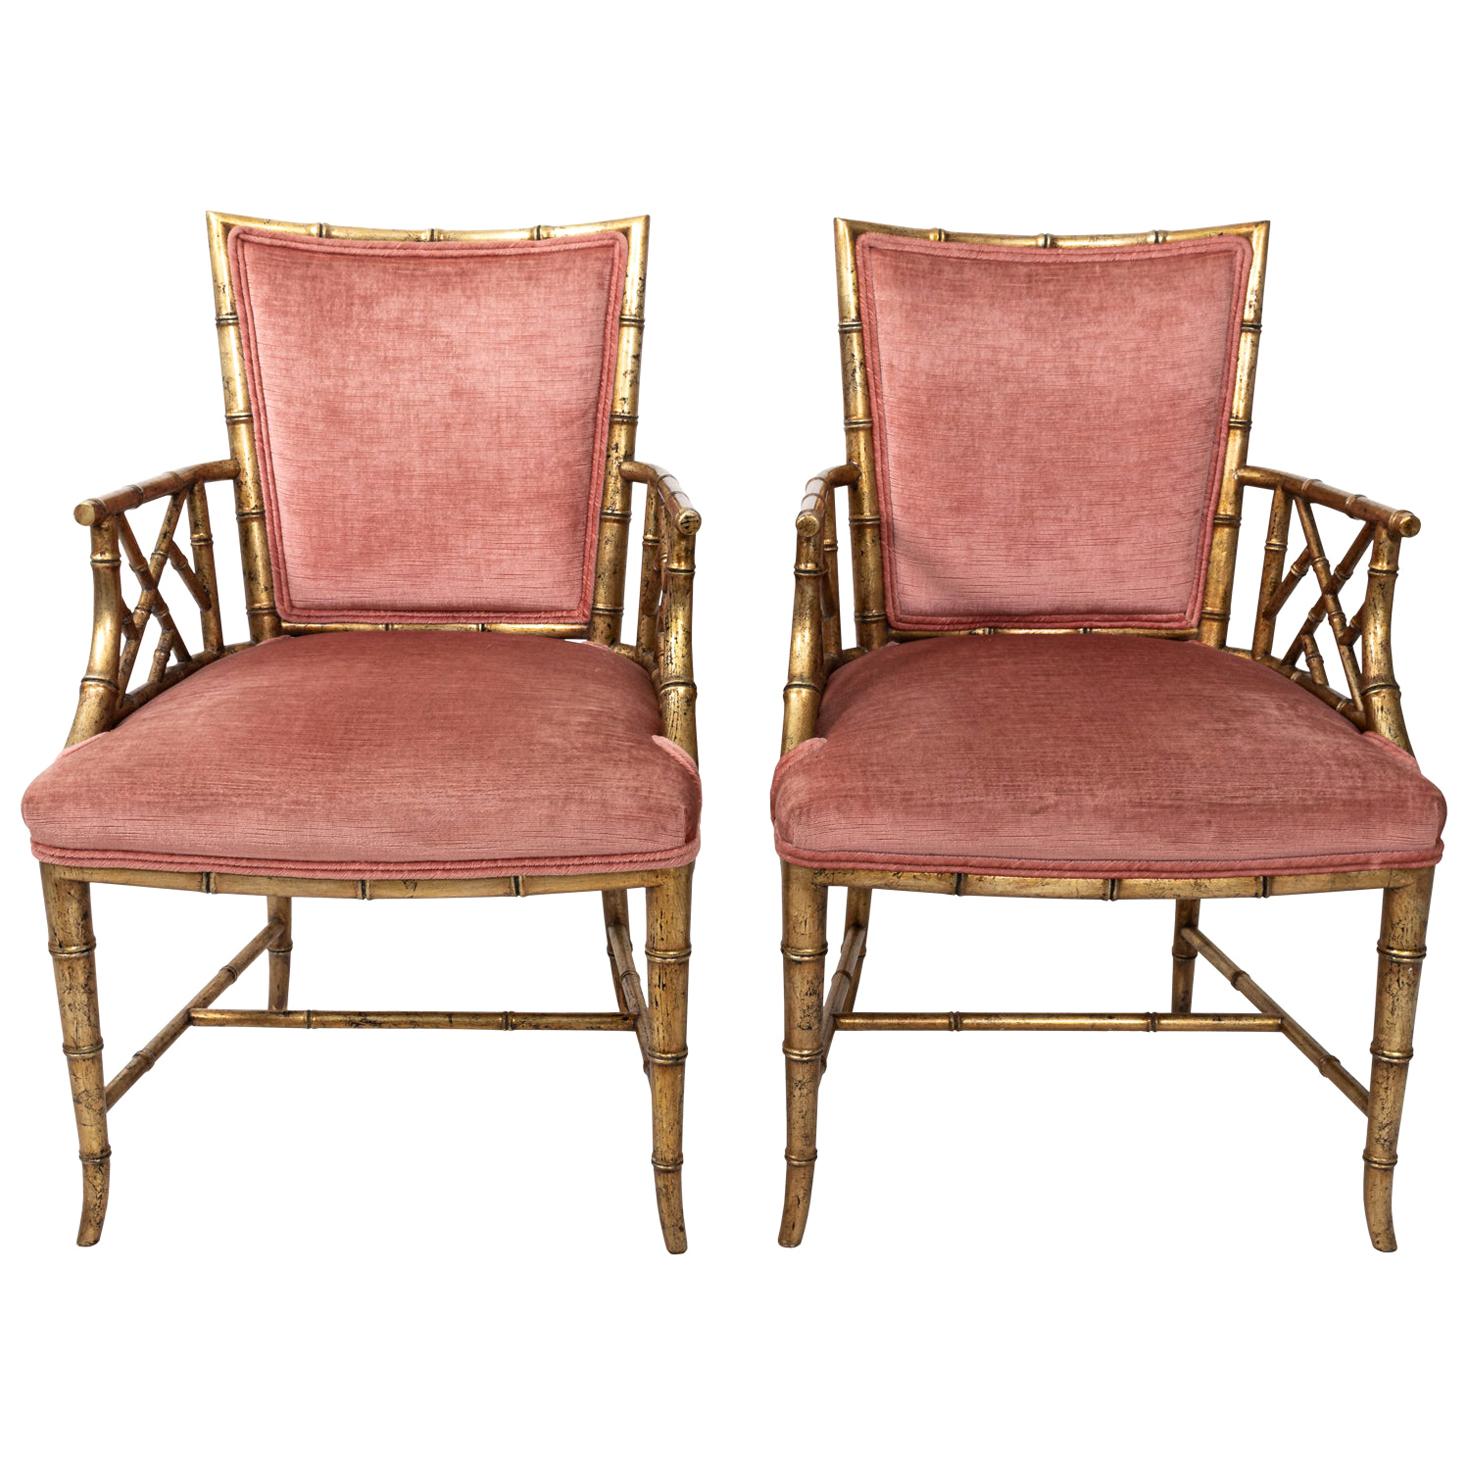 Pair of Upholstered Gilt Faux Bamboo Armchairs